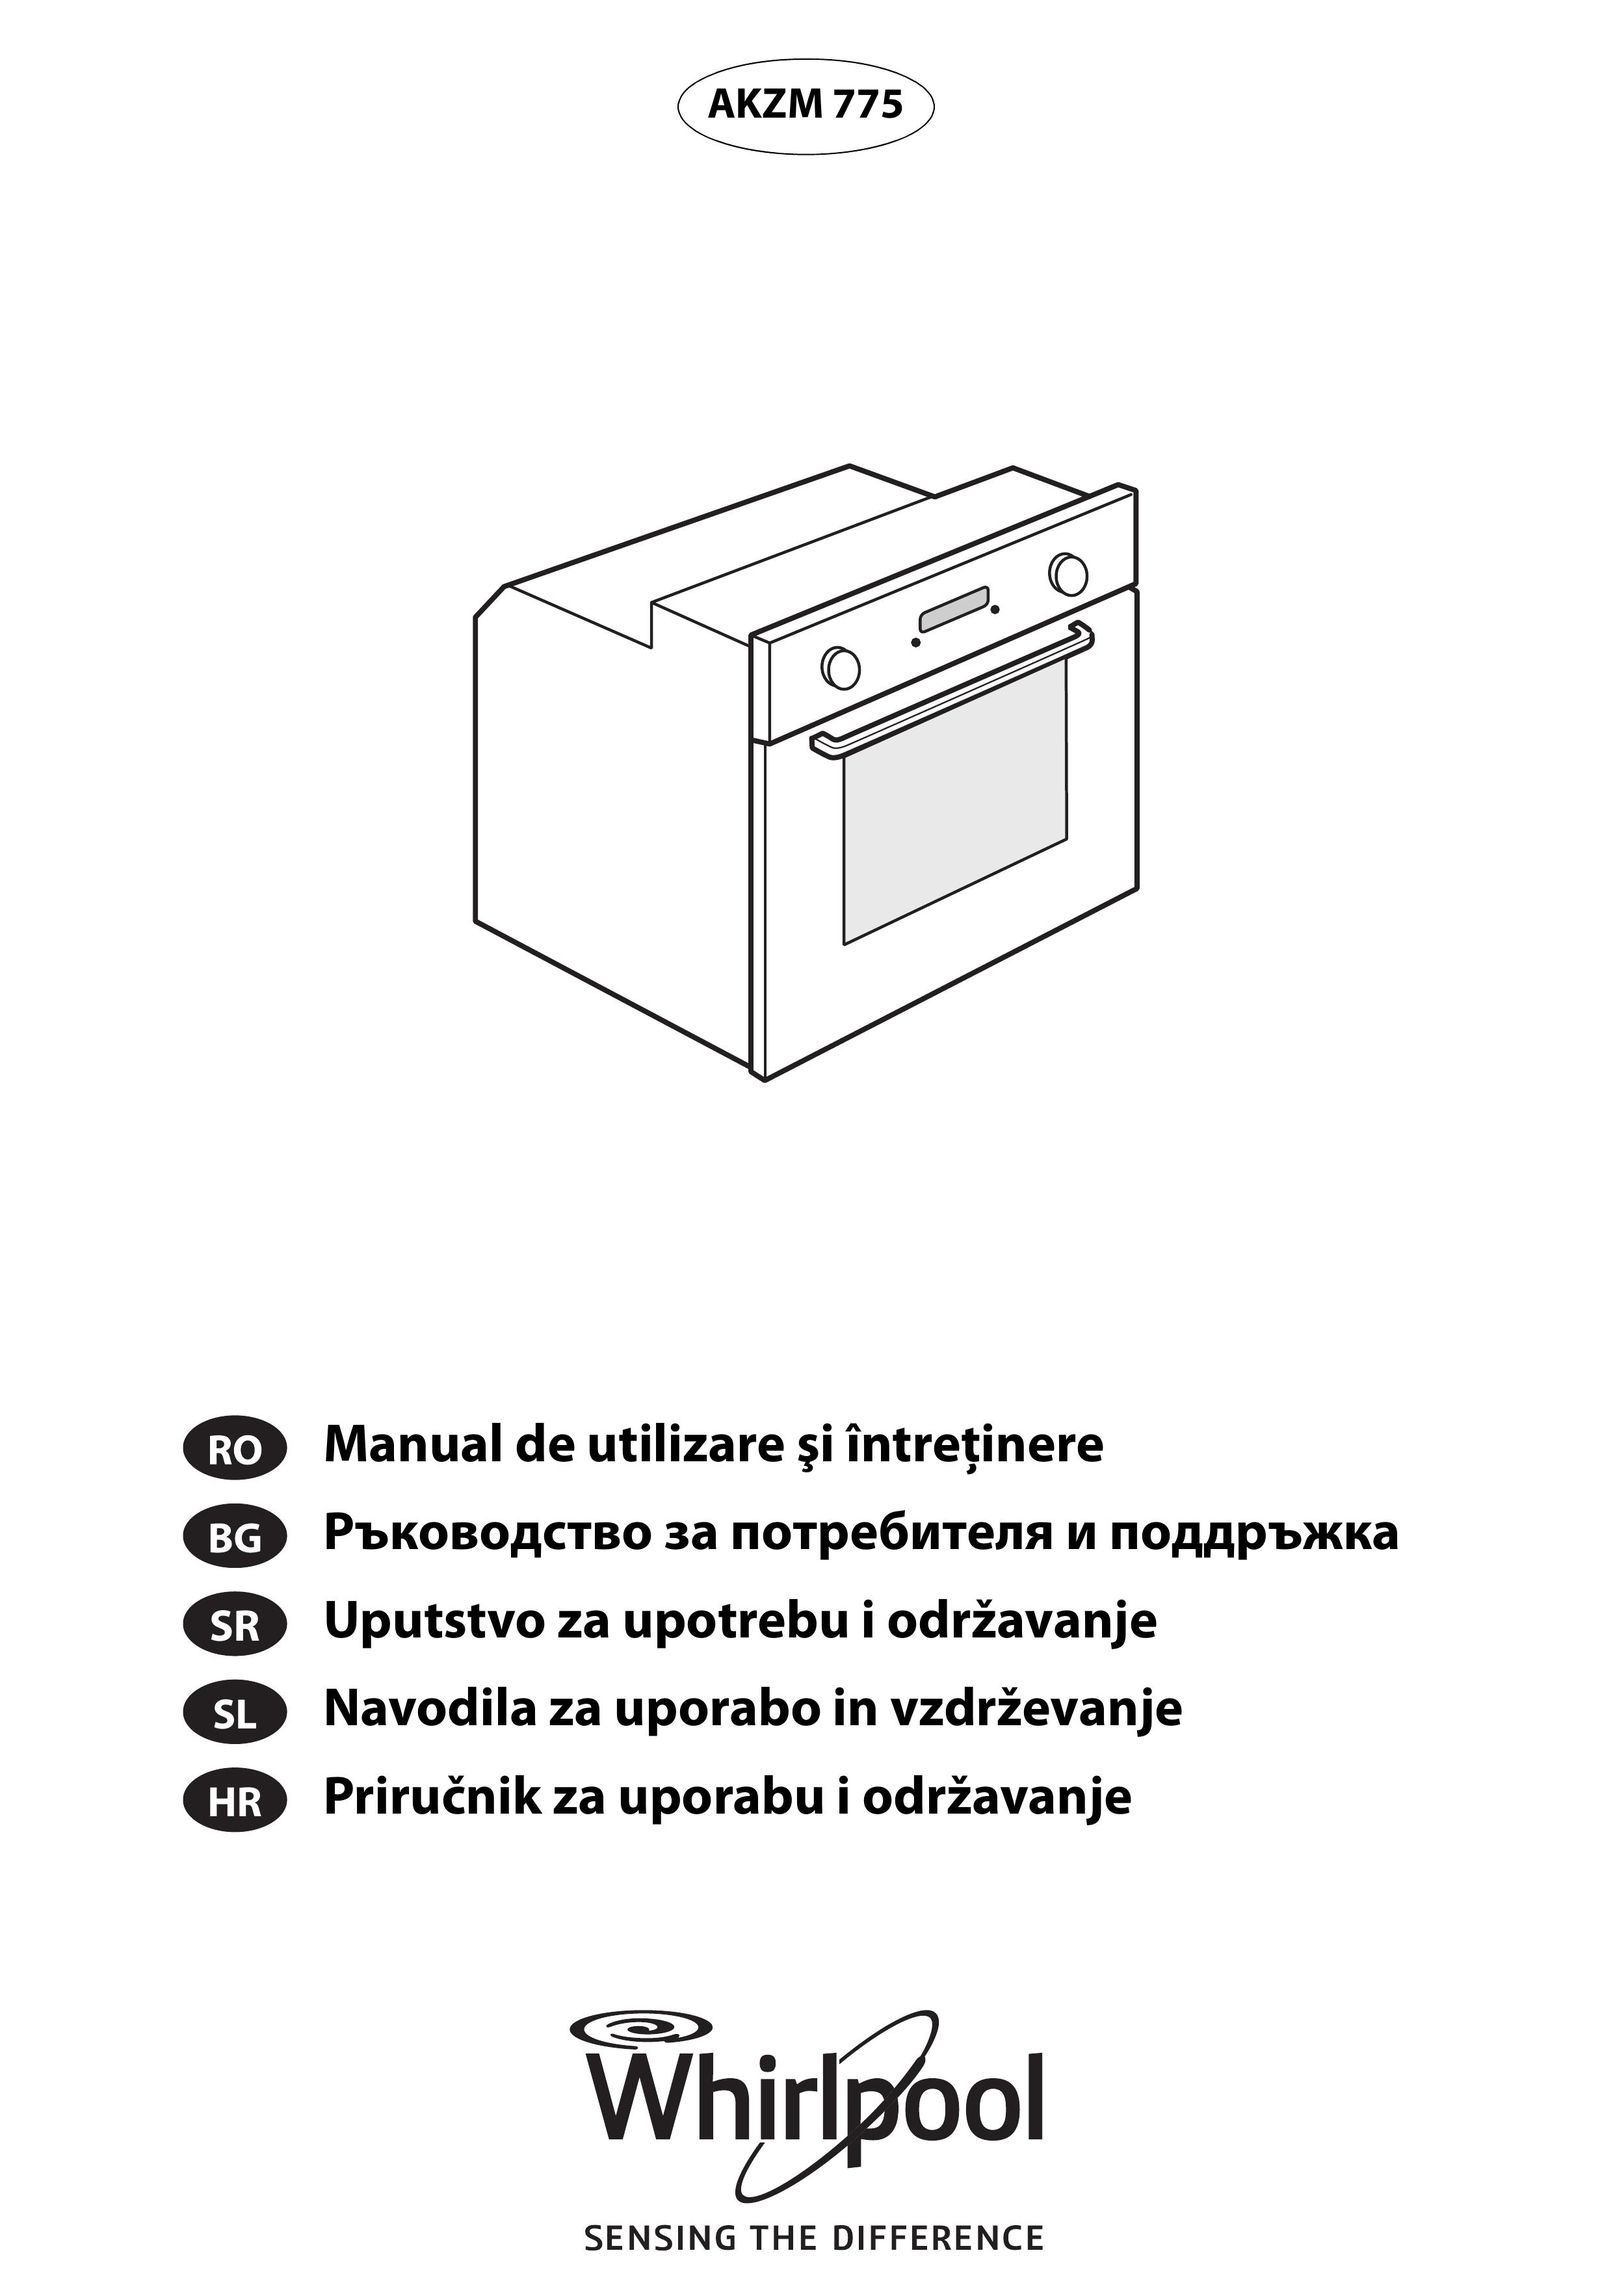 Whirlpool AKZM 775 Double Oven User Manual